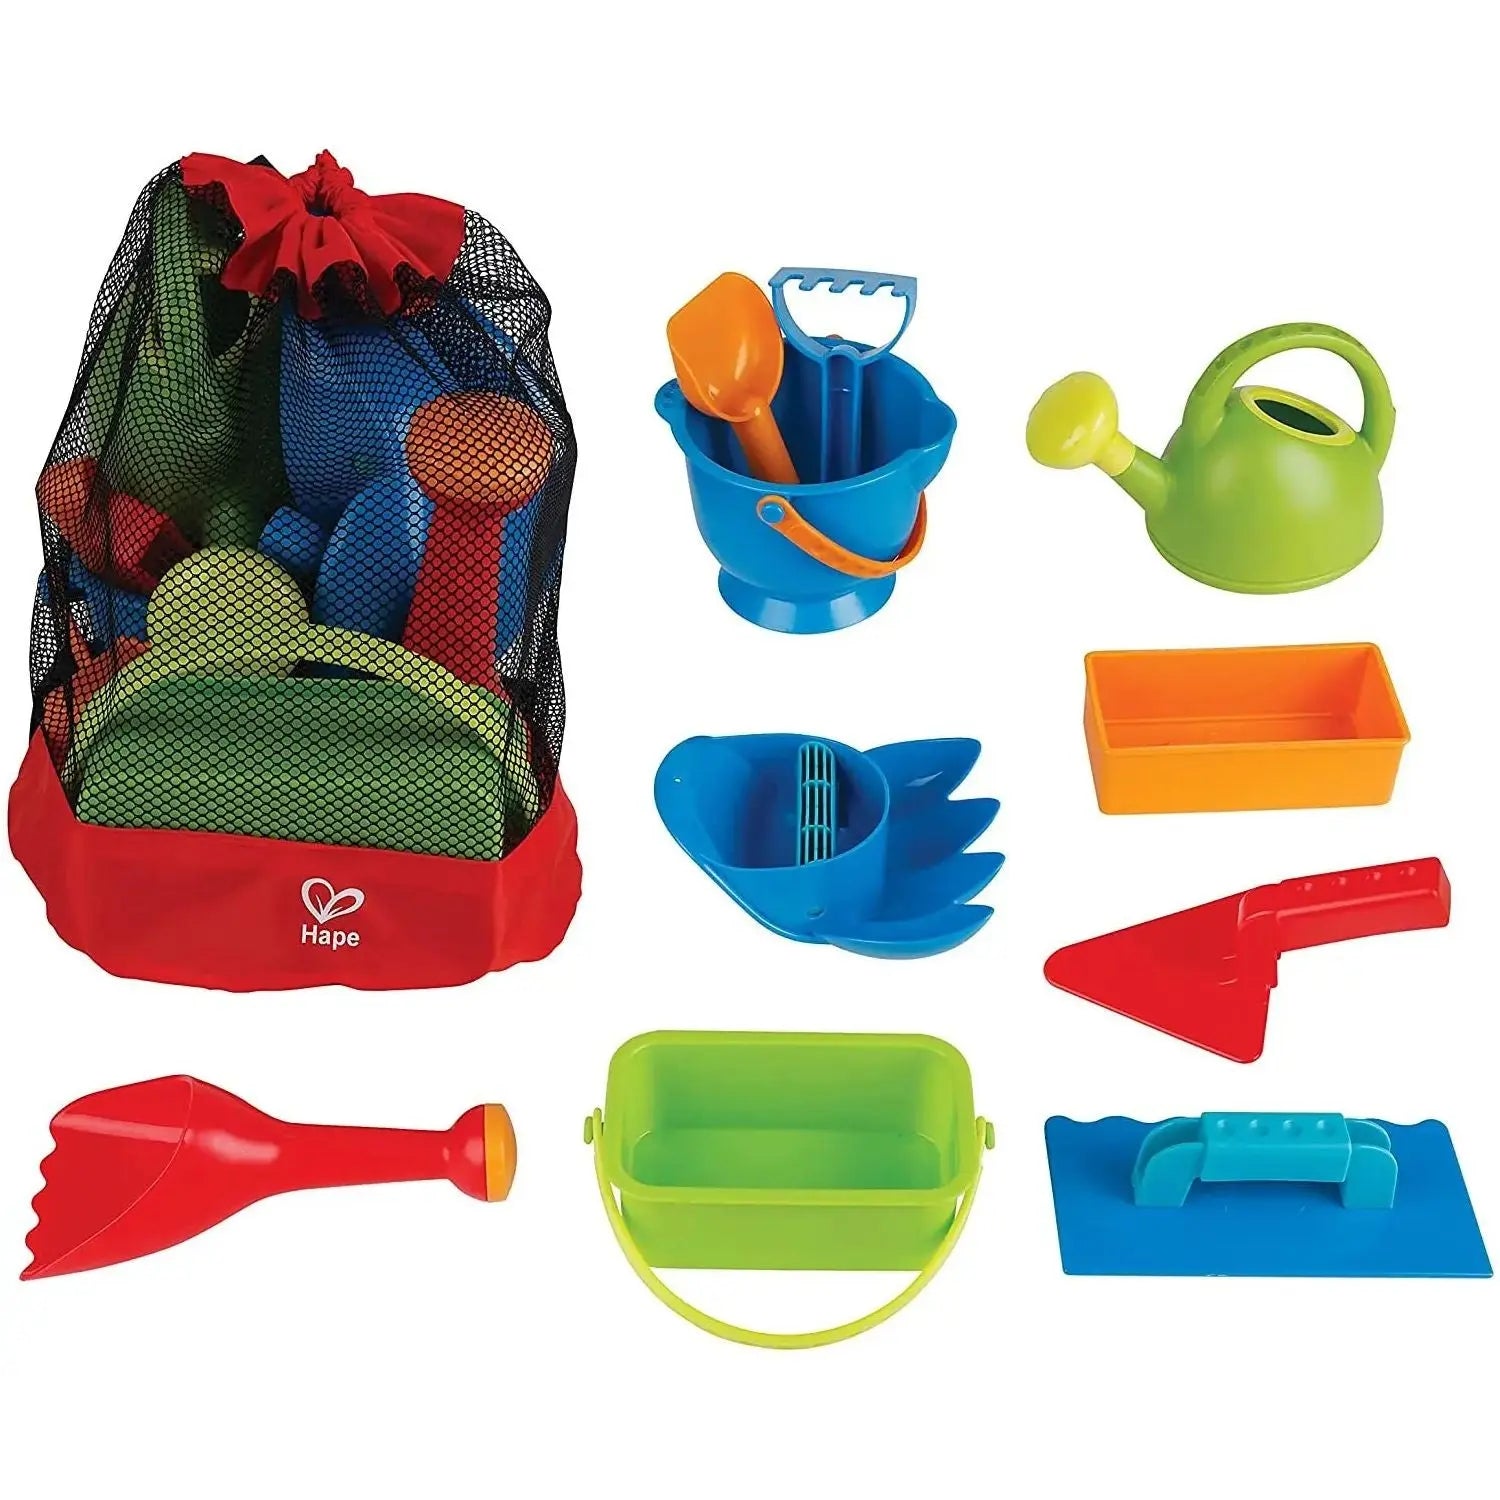 Big Beach Toy Essential Set with Durable Mesh Bag